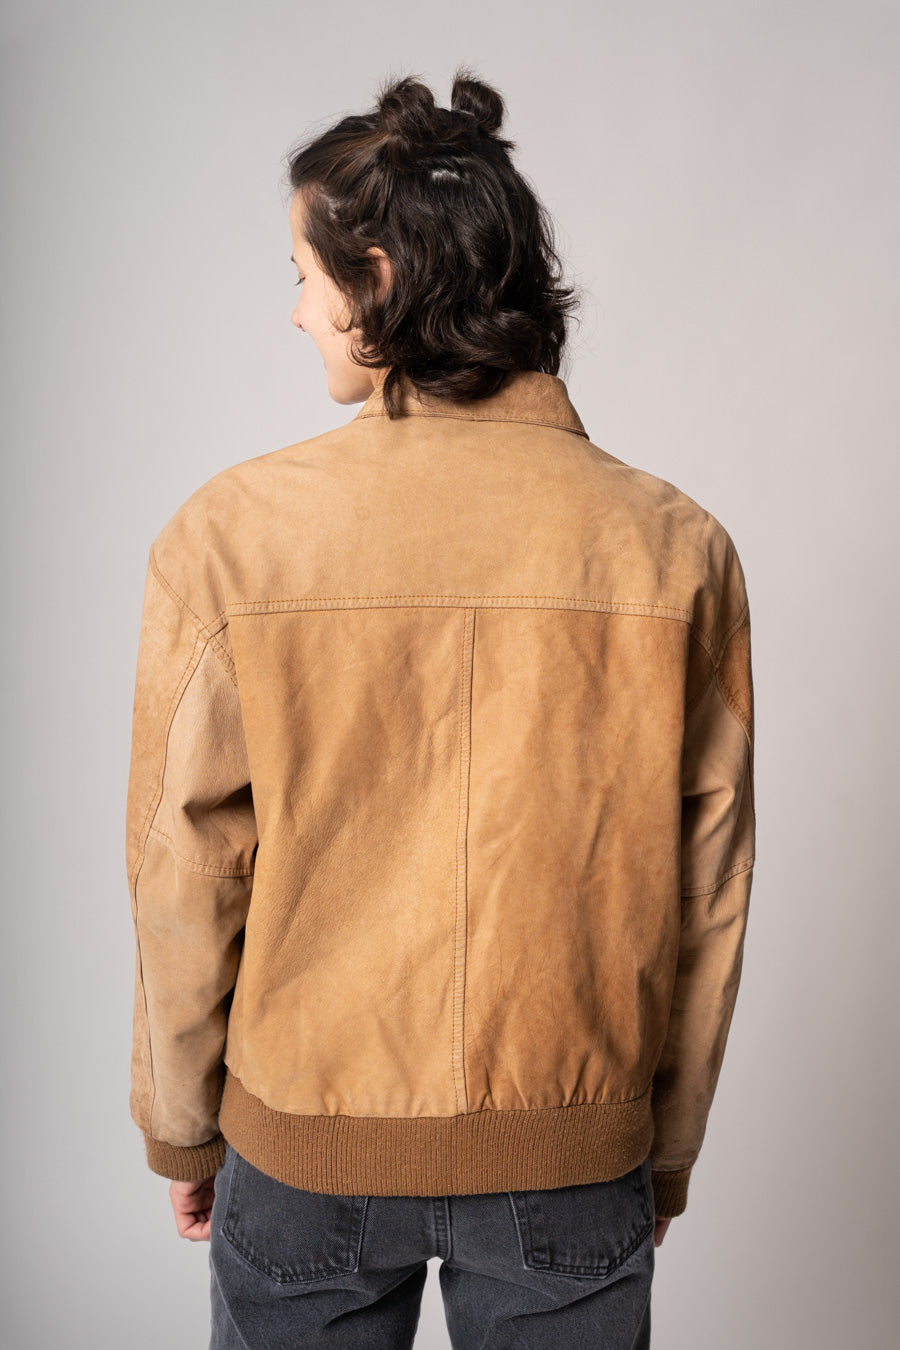 1990’s Tan Leather Bomber Jacket